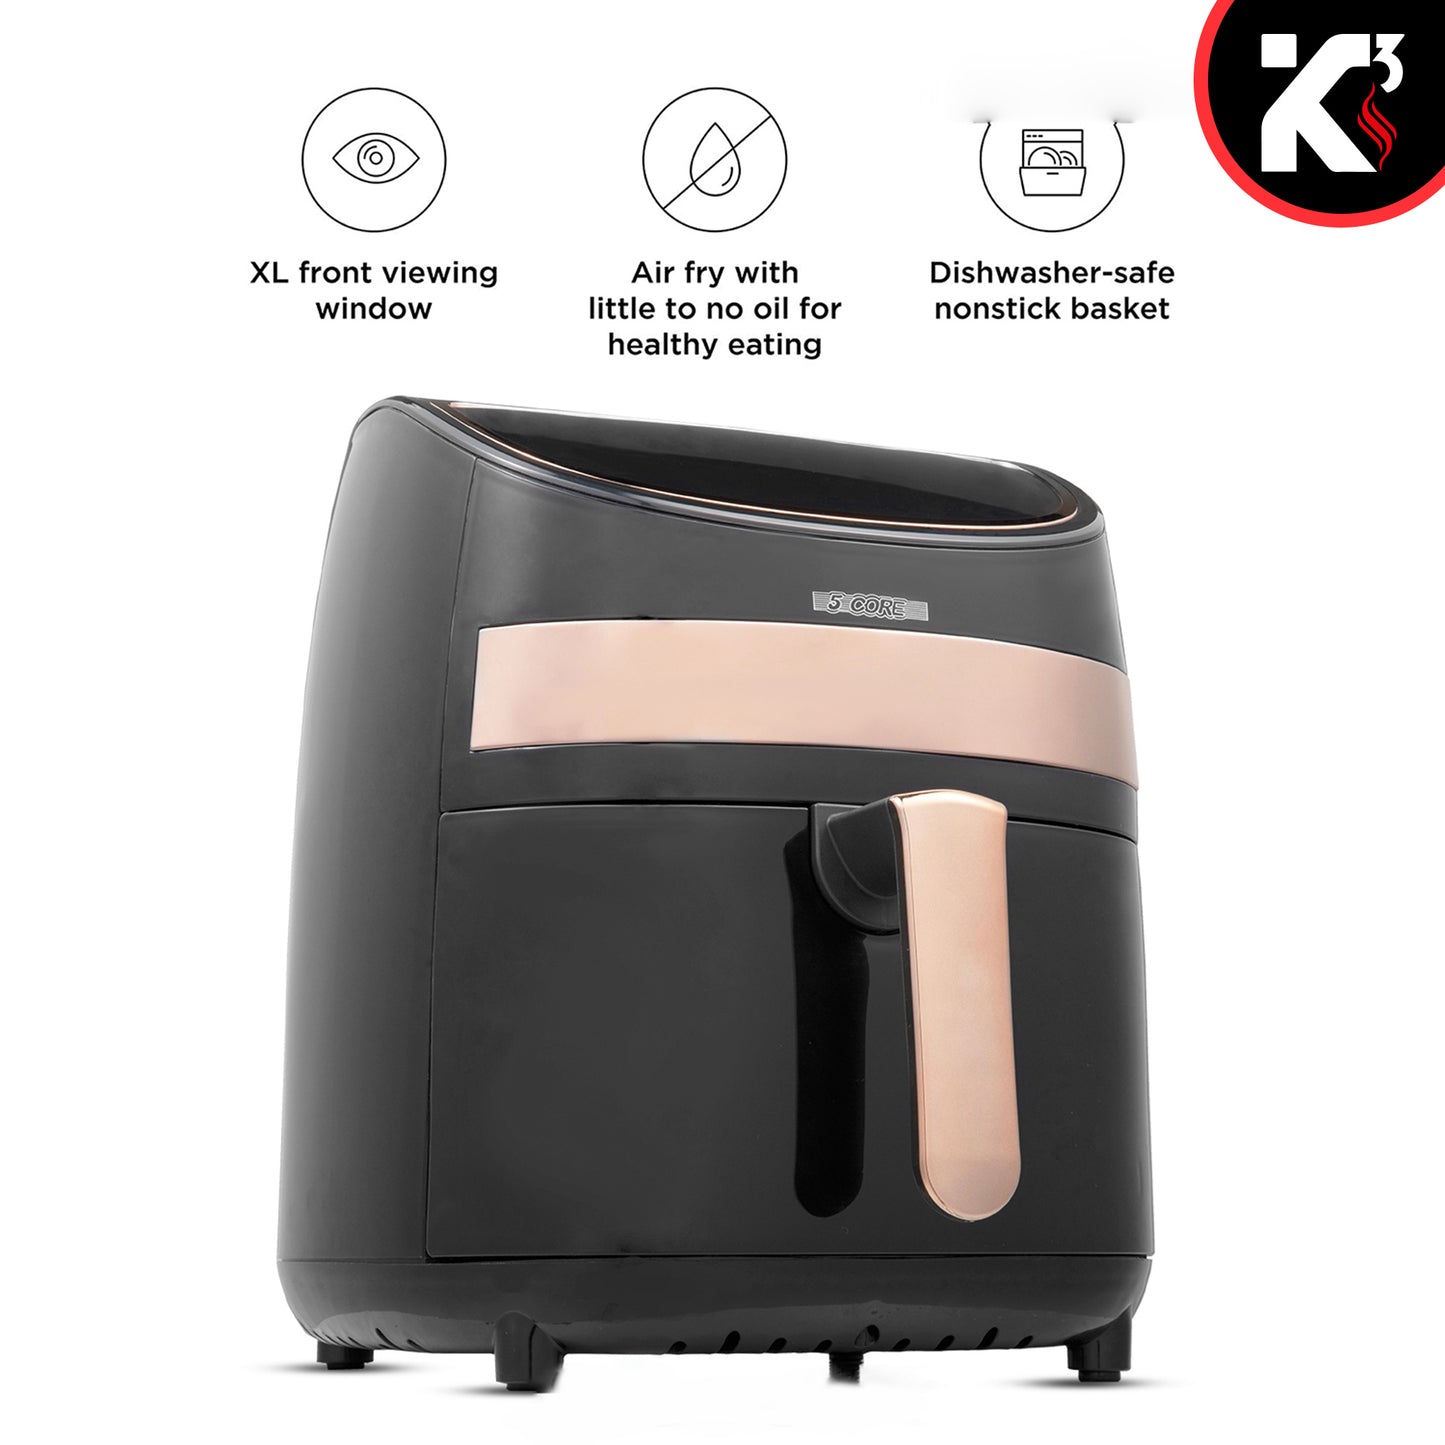 Air Fryer Oven 3.2 Quart (3 Liter)| 4-in-1 Black Airfryer, Bake, Roast, Reheat, Space-saving & Low-noise, 85% Oil-less, Nonstick| Large Touch Screen, ETL Approved- AF 320